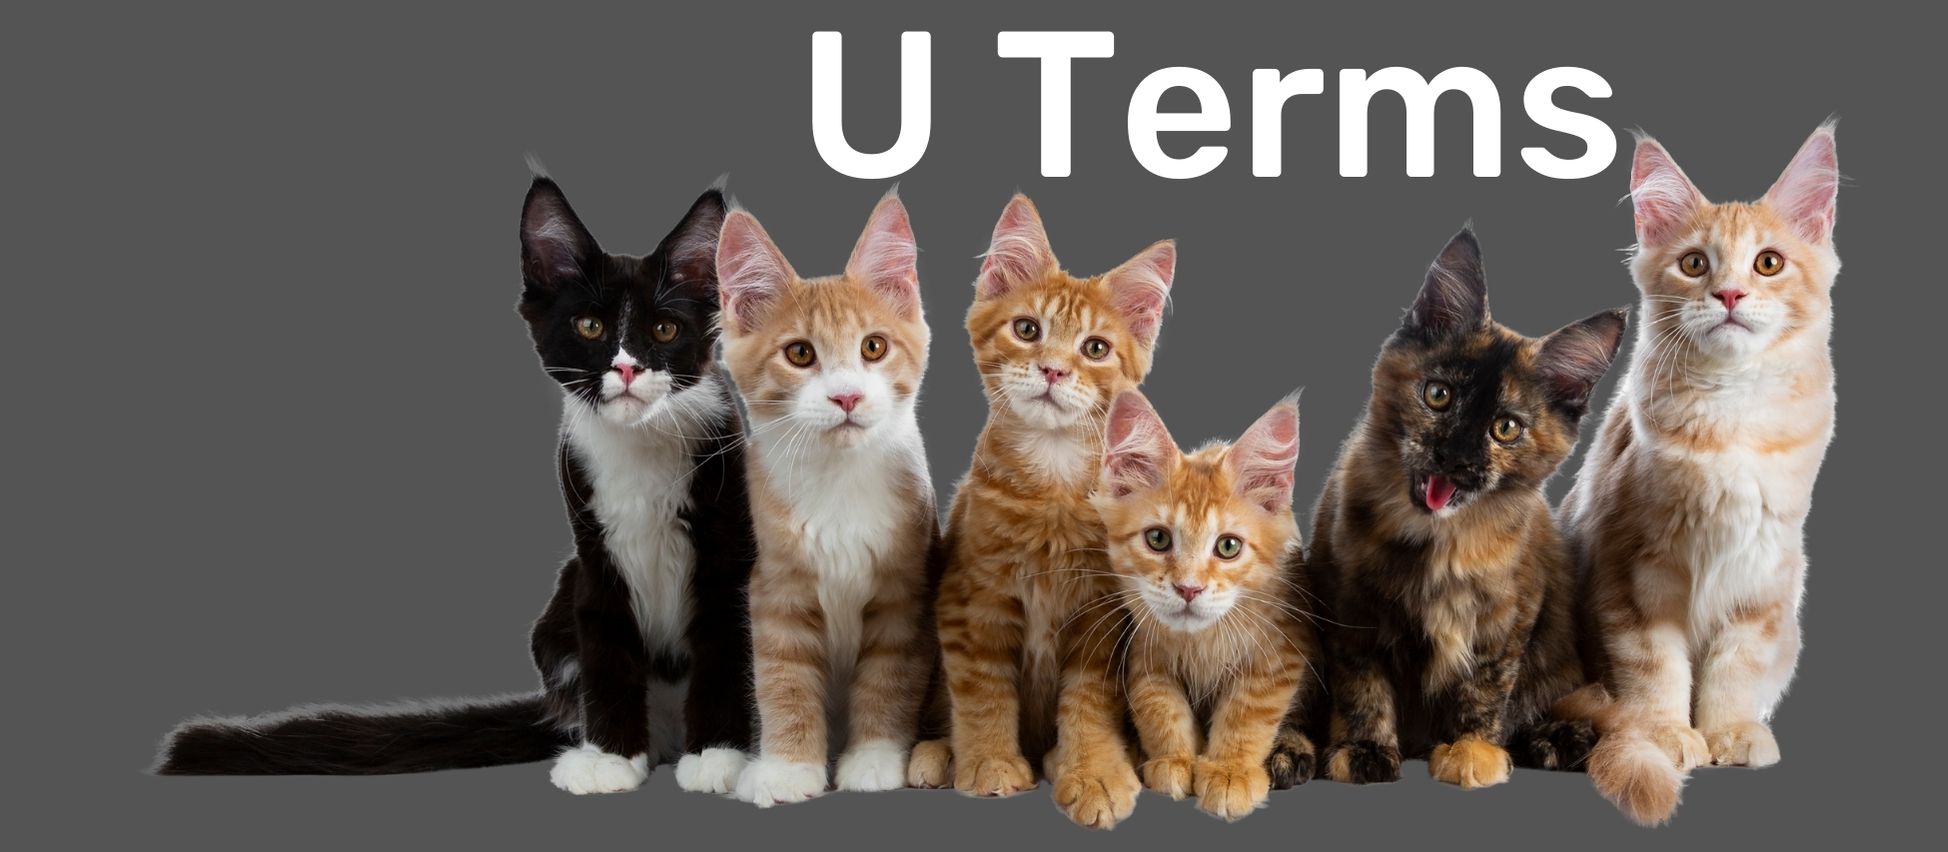 Group of six cats in front of a gray background with text reading 'U Terms' at the top to indicate a new section of the glossary